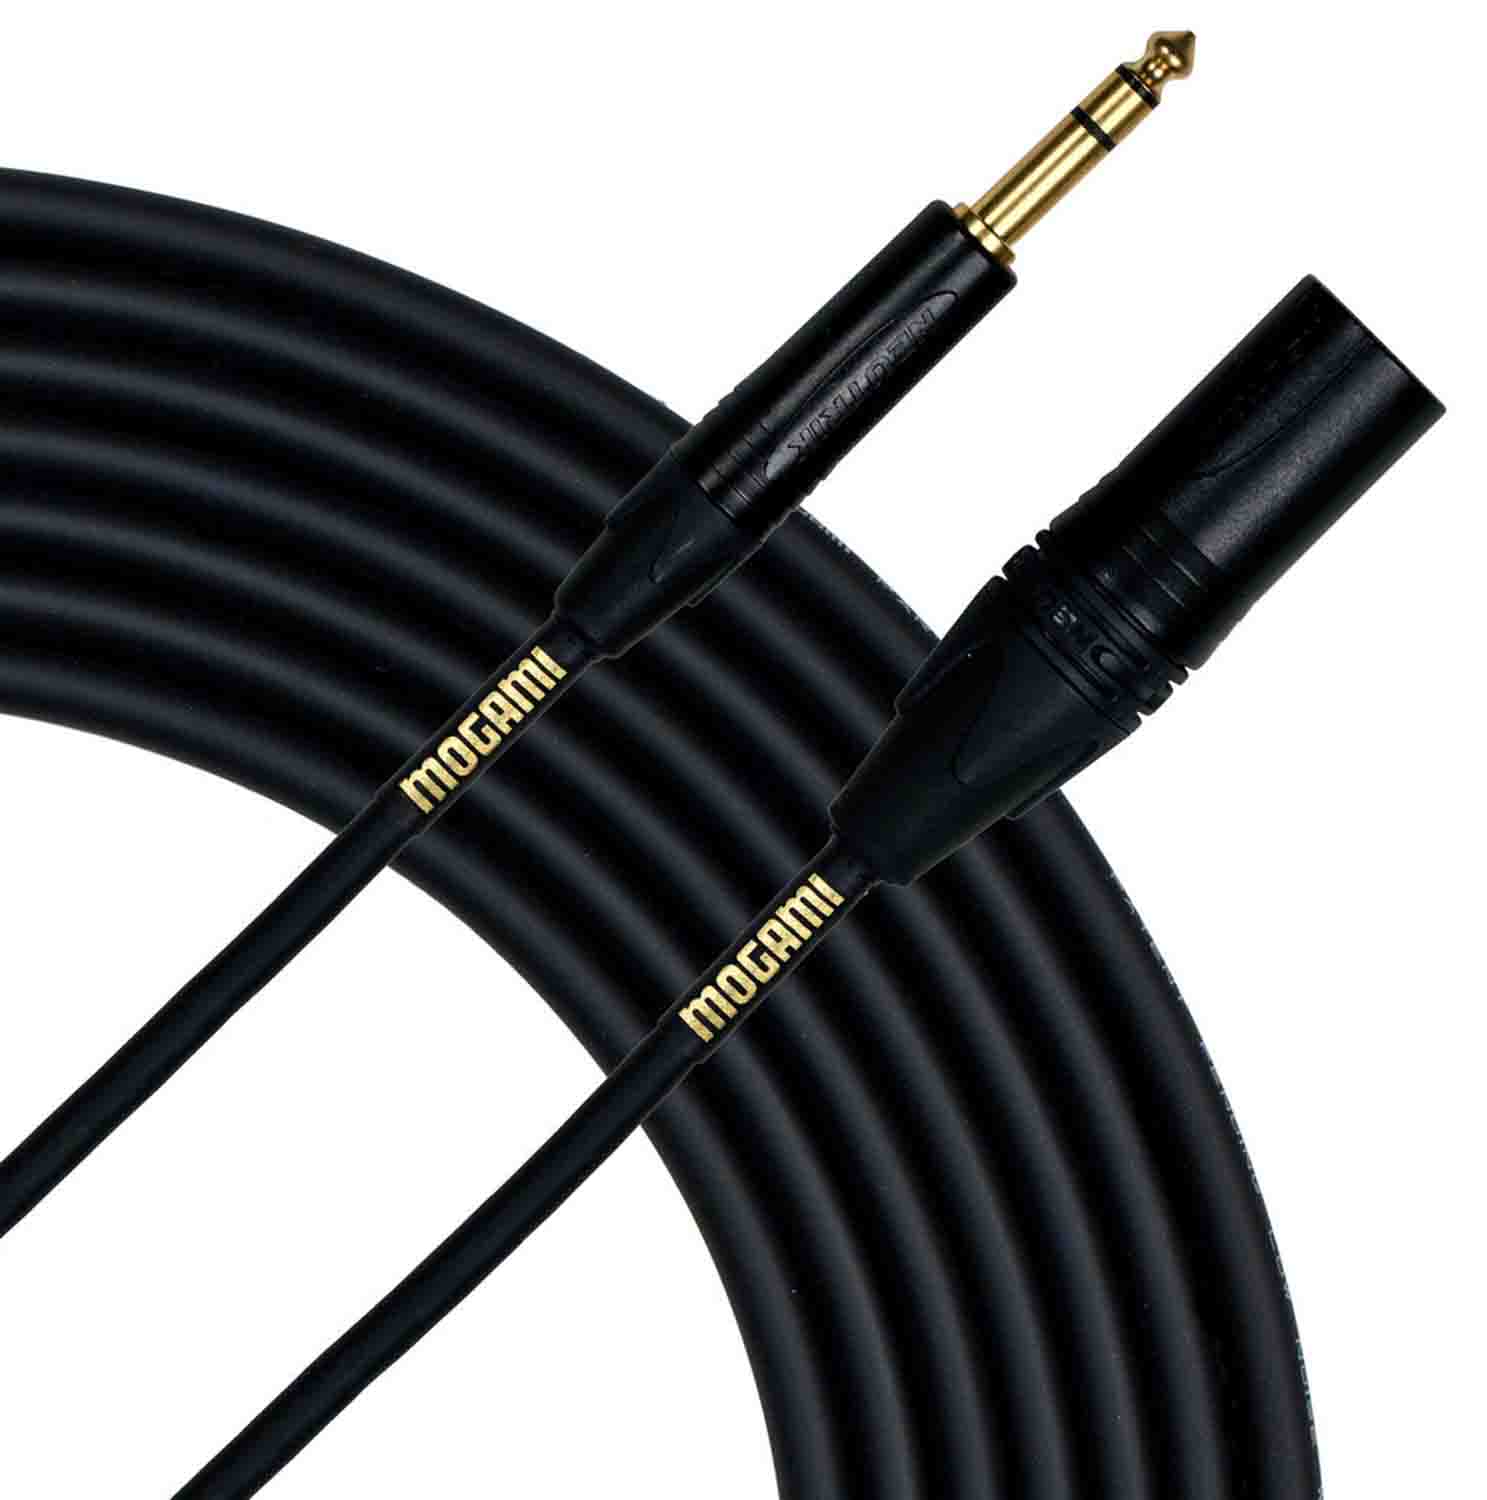 Mogami GOLD-TRSXLRM-10, Gold 1/4" TRS Male to XLR Male Balanced Patch Cable (10') - Hollywood DJ